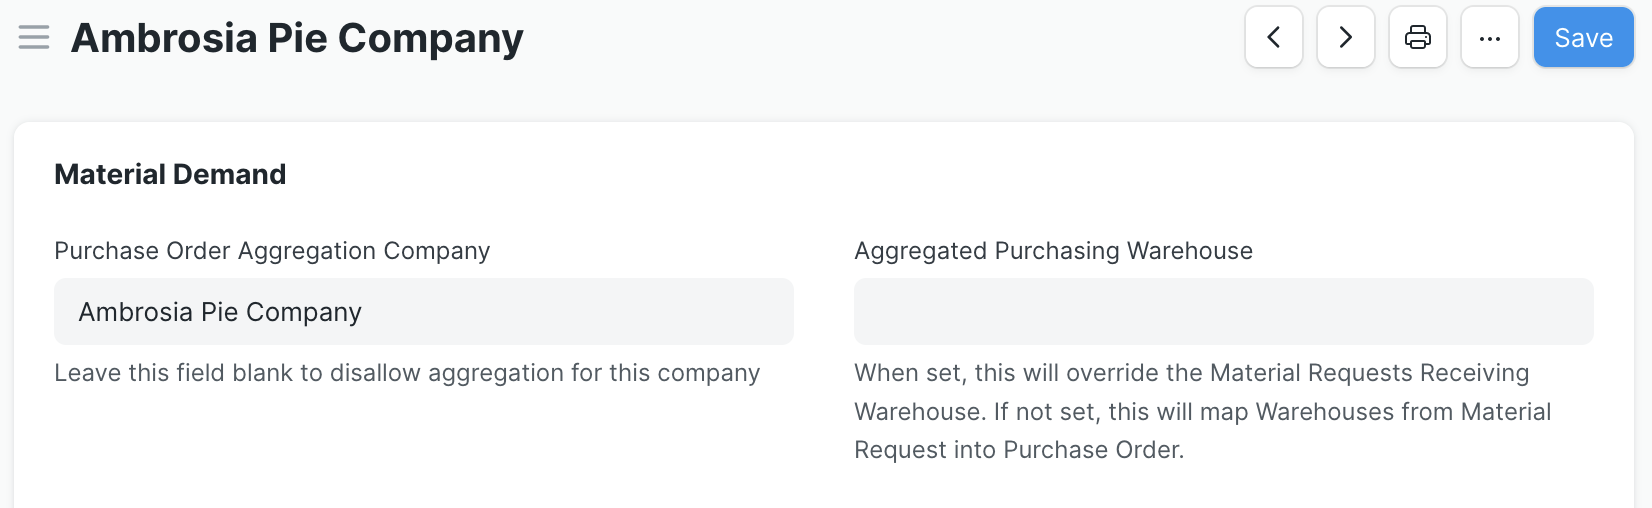 Screen shot of the two relevant fields (Purchase Order Aggregation Company and Aggregated Purchasing Warehouse) to configure the Material Demand report